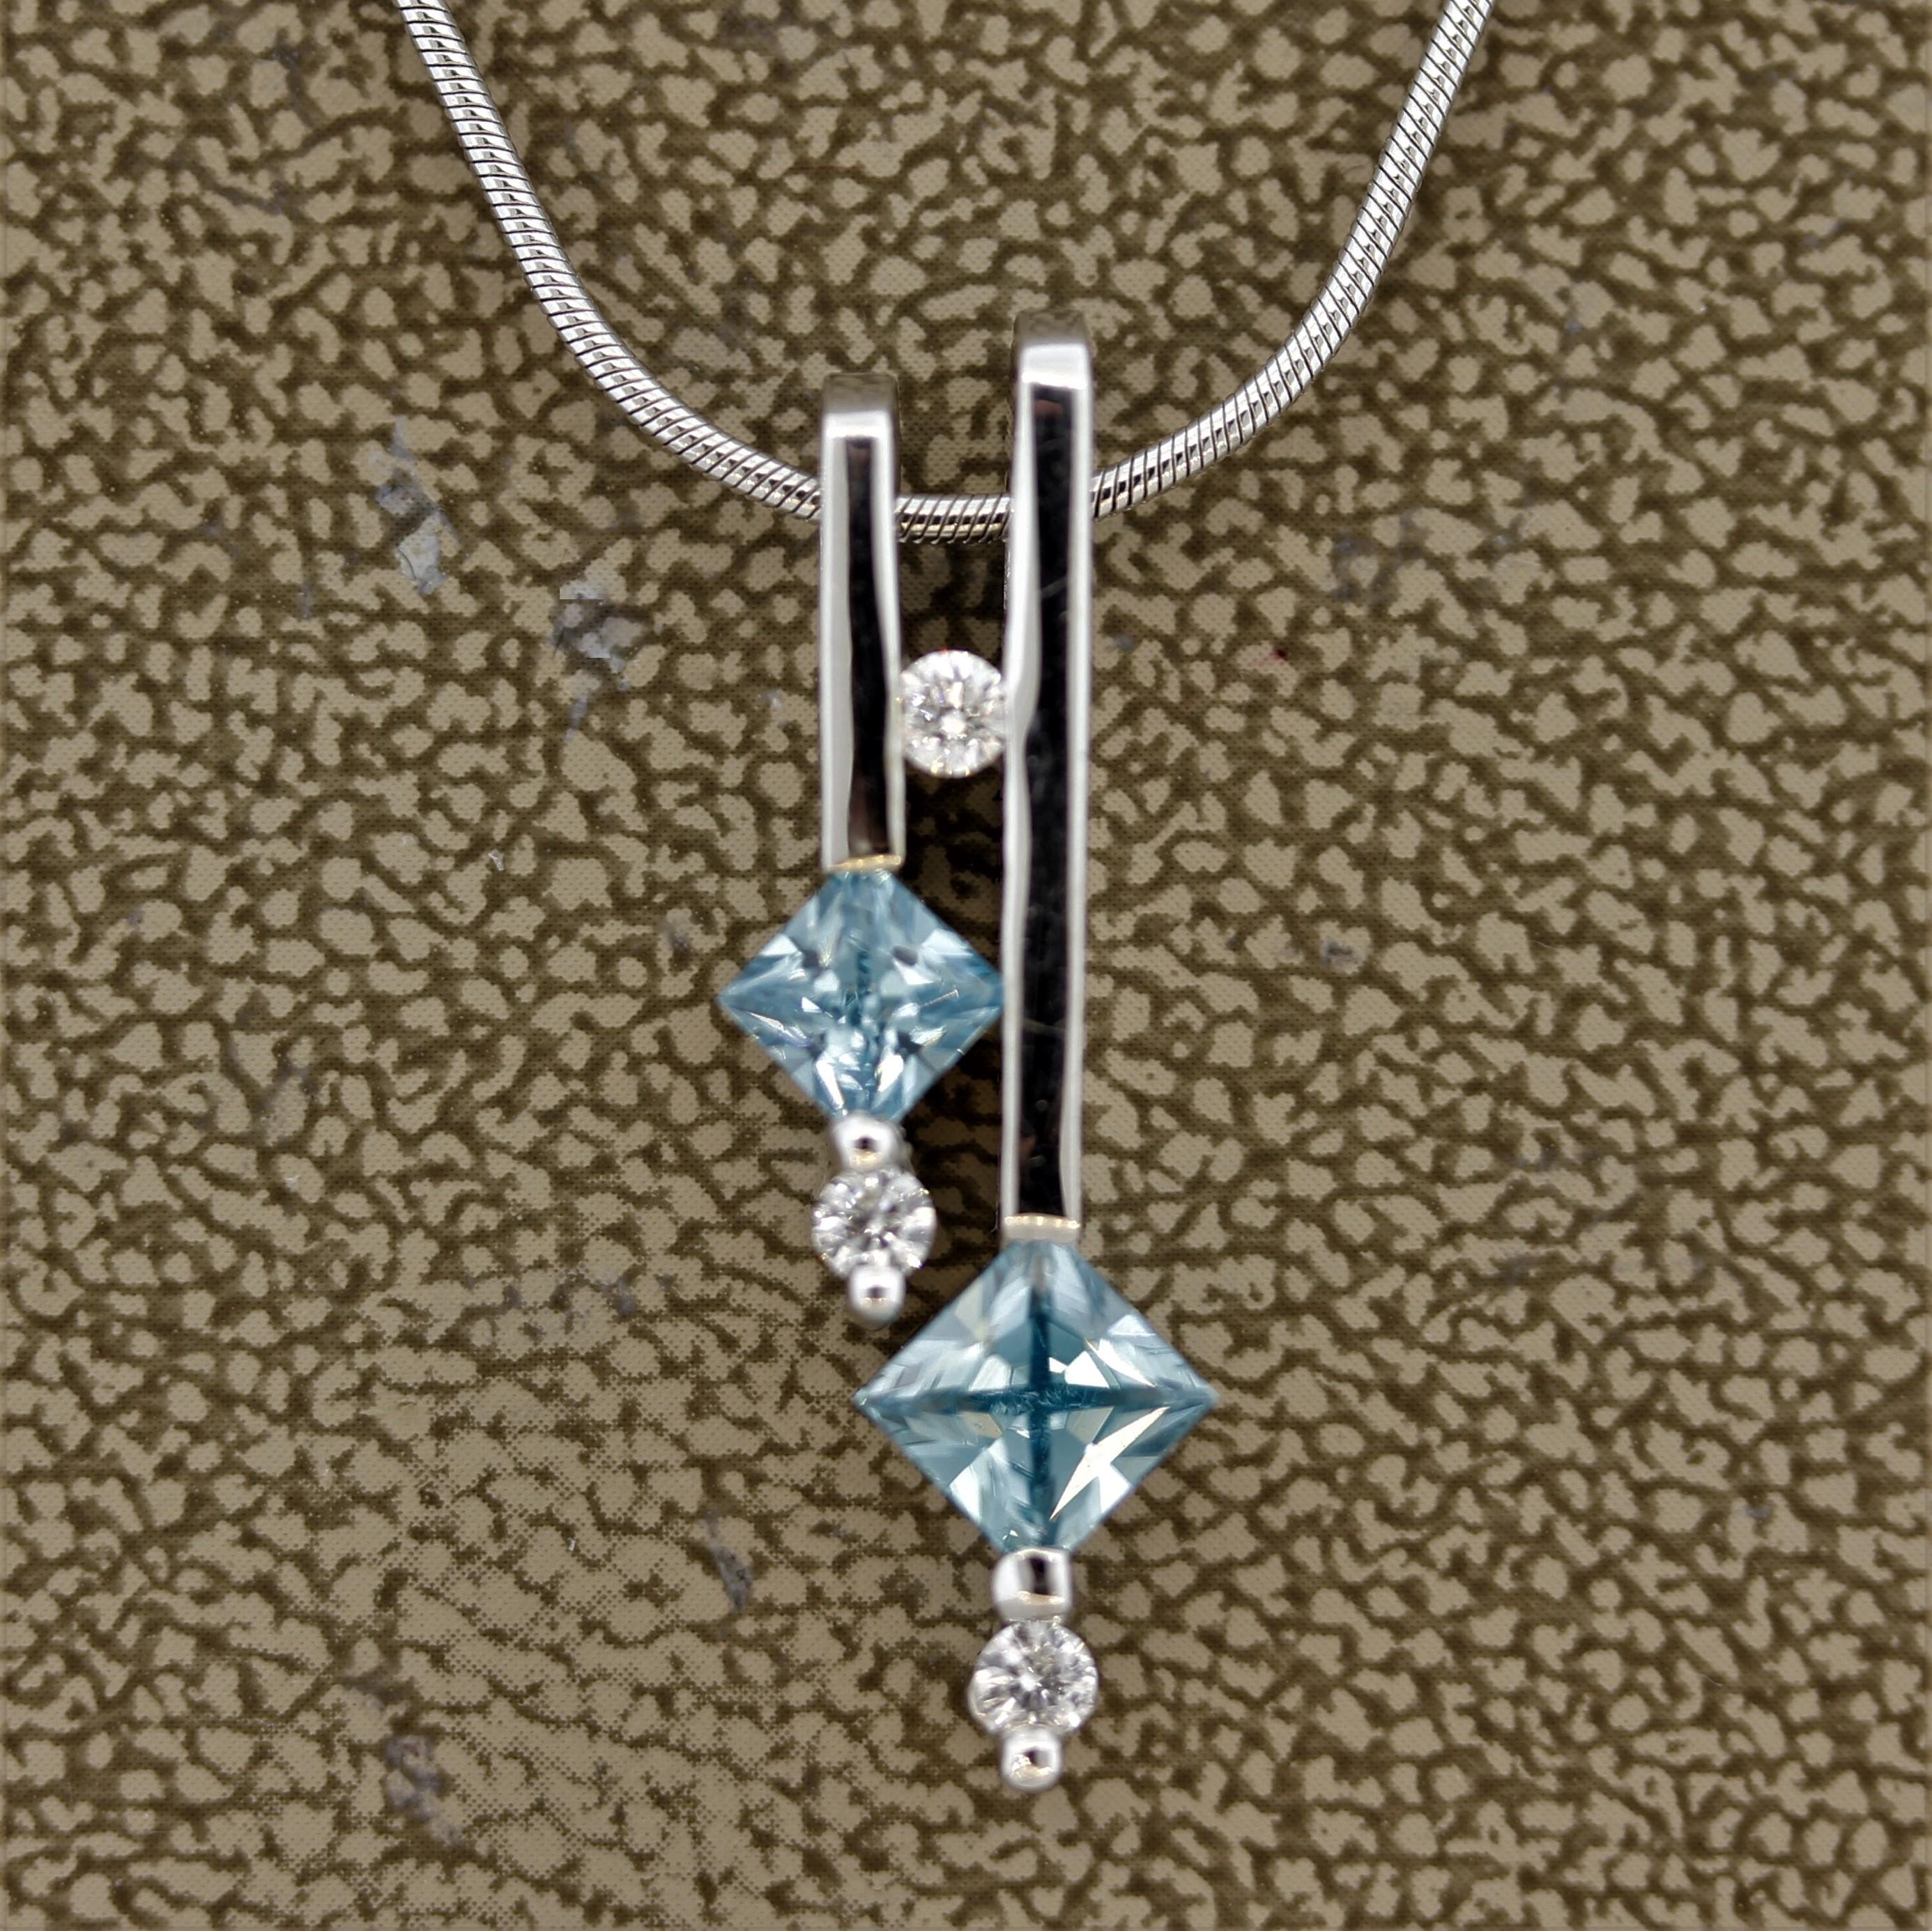 Zircon is an underappreciated fine and natural gemstone with the same brilliance and brightness of a diamond! This pendant features 2 square cut blue zircons weighing 1.32 carats along with 3 round brilliant cut diamonds weighing 0.14 carats. Made